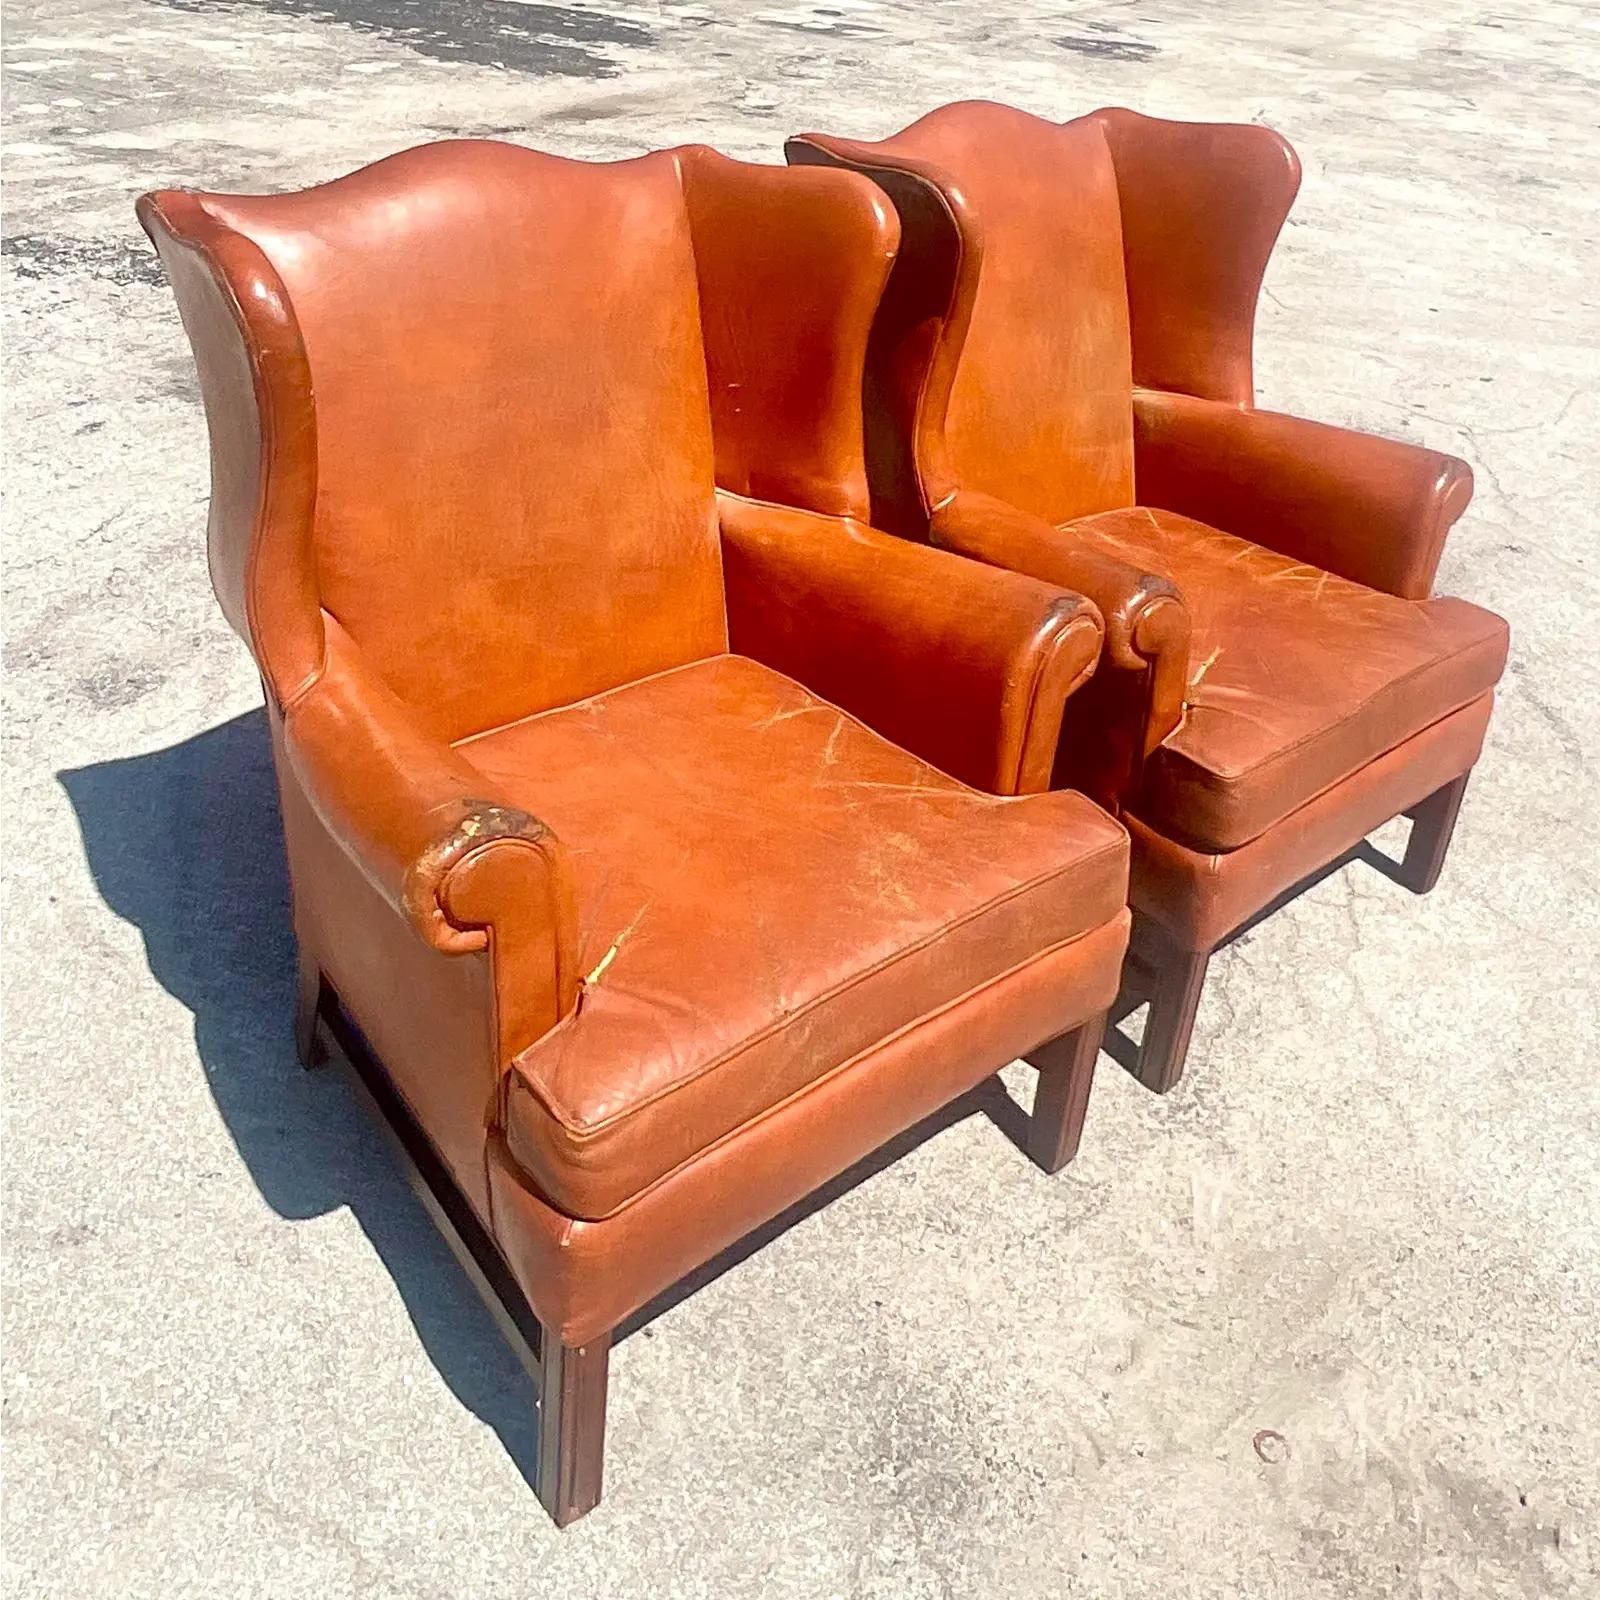 North American Vintage Boho Distressed Leather Wingback Chairs, a Pair